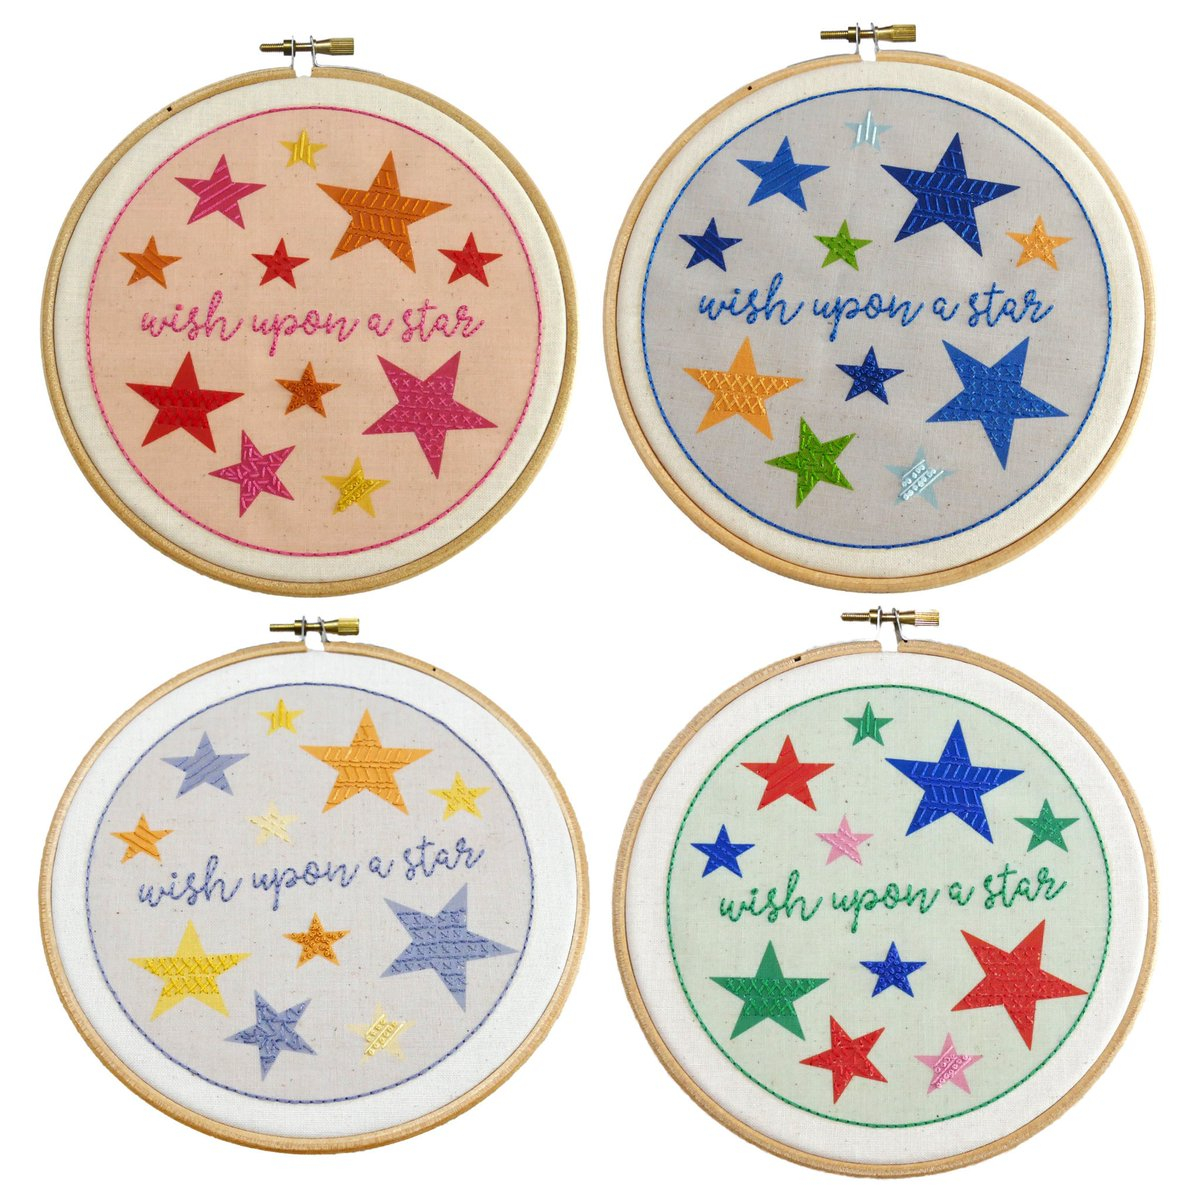 Modern Embroidery Patterns Handembroiderykits Tagged Tweets And Download Twitter Mp4 Videos